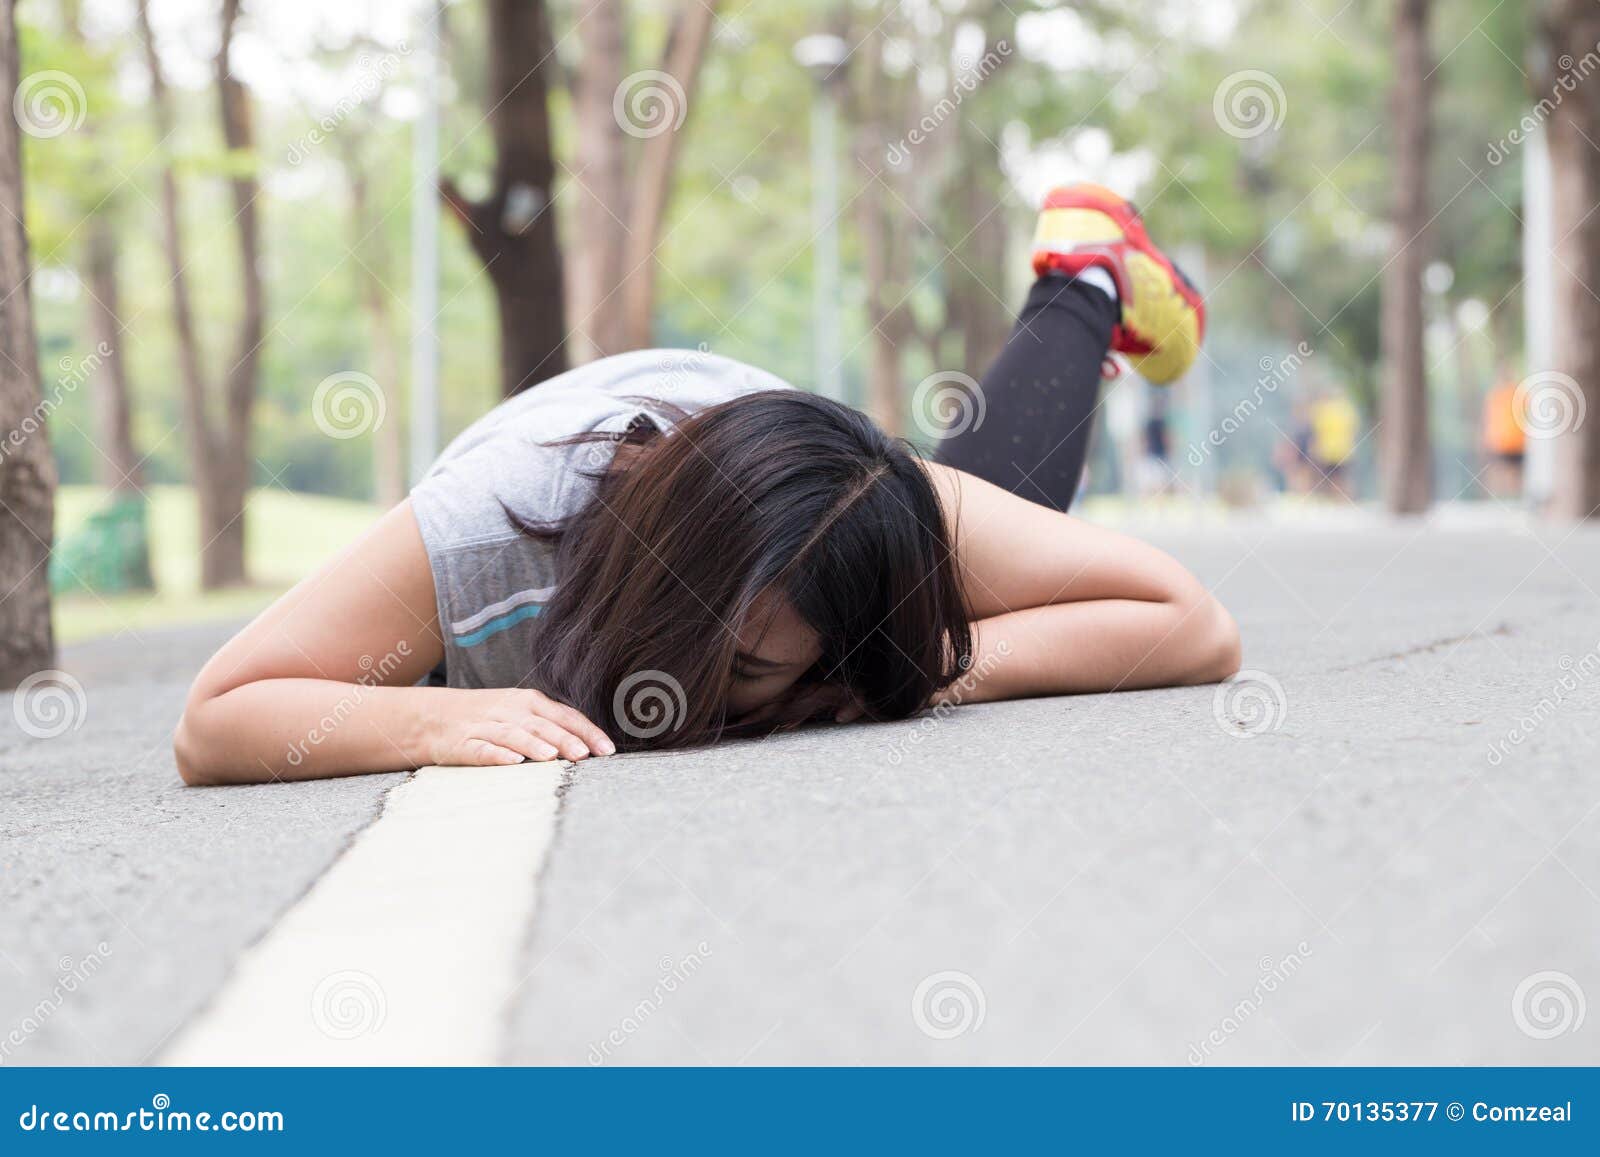 Accident. Stumble And Fall While Jogging Stock Image 